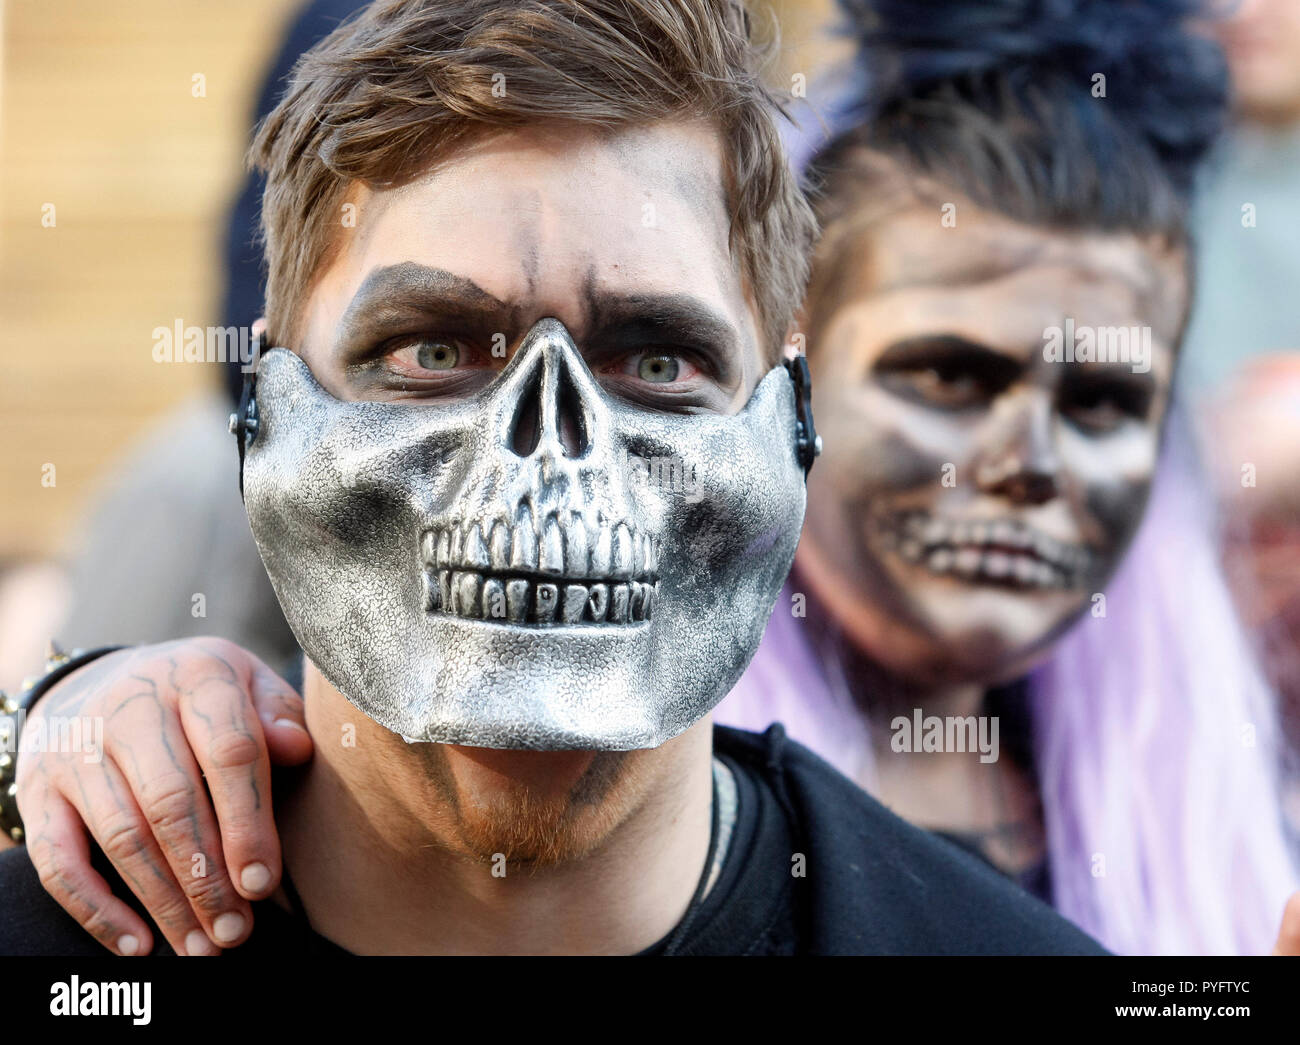 People are seen dressed in zombie costumes and make-up during the celebrations. Hundreds of people marched through the streets in Kiev downtown, on the eve of the Halloween zombie celebrations. Stock Photo